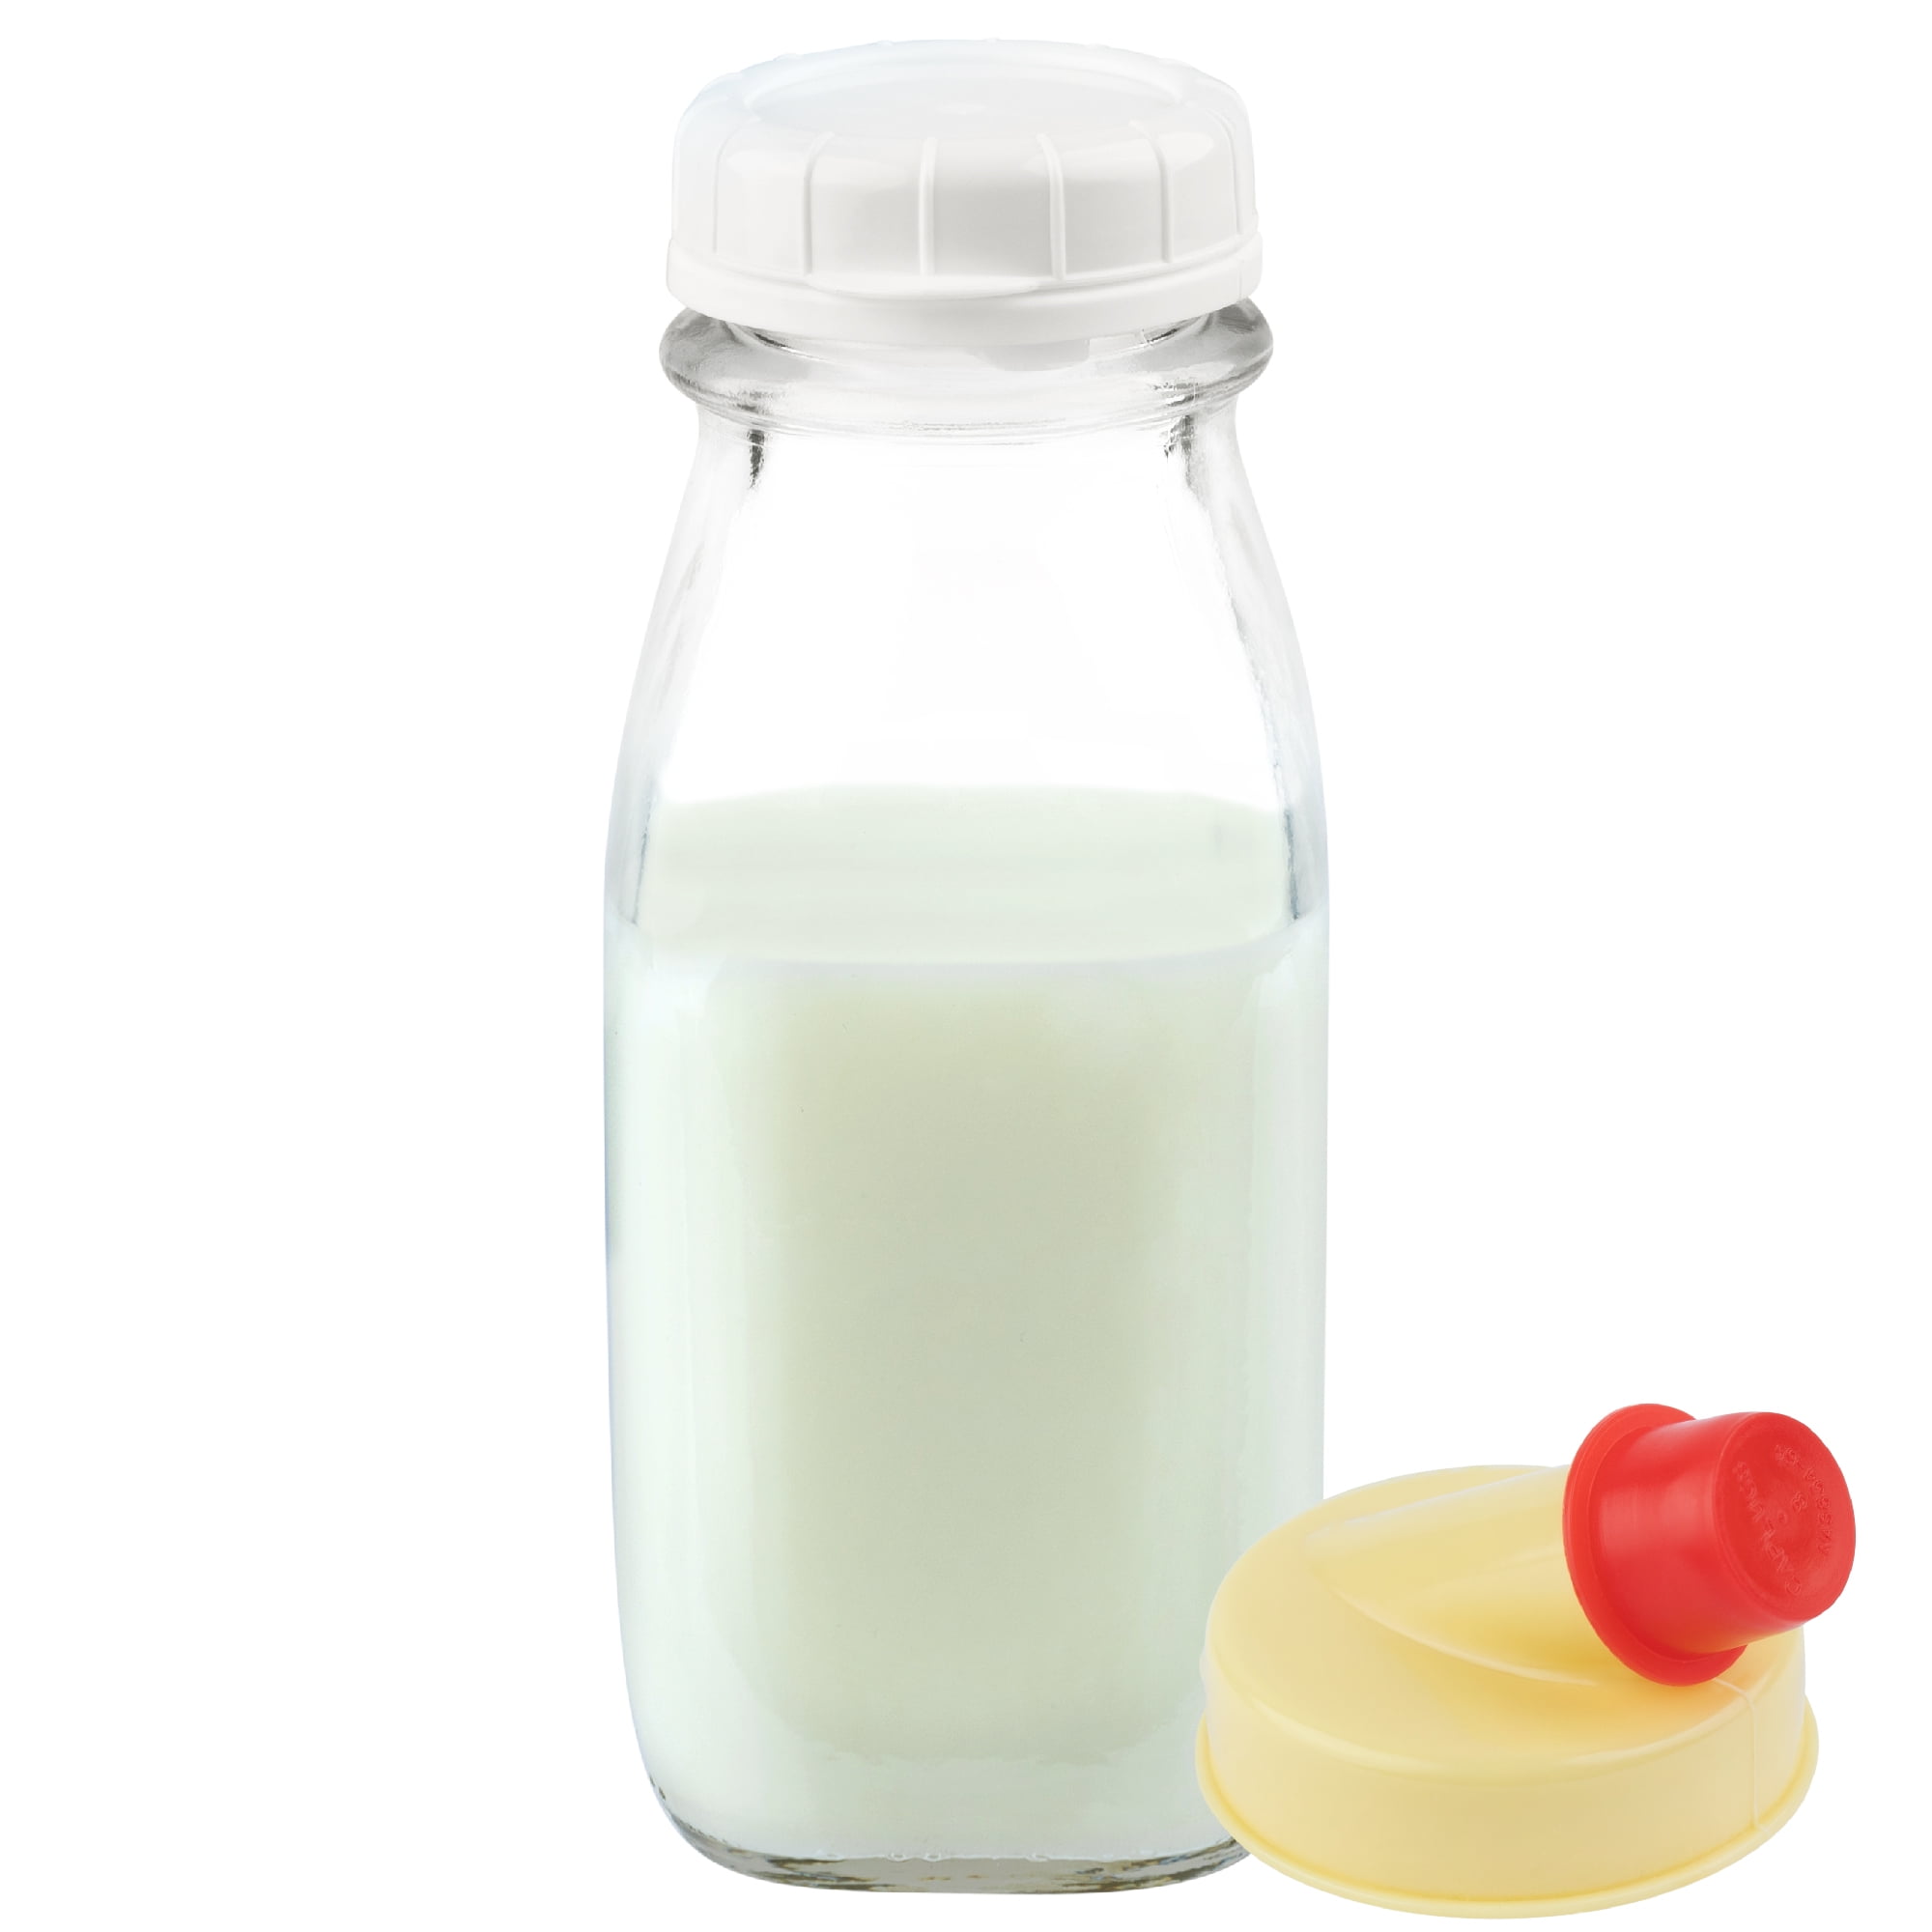 32 oz Glass Milk Bottles with Caps 2 Count 2 Gold & 2 Black Steel Sealable  Caps